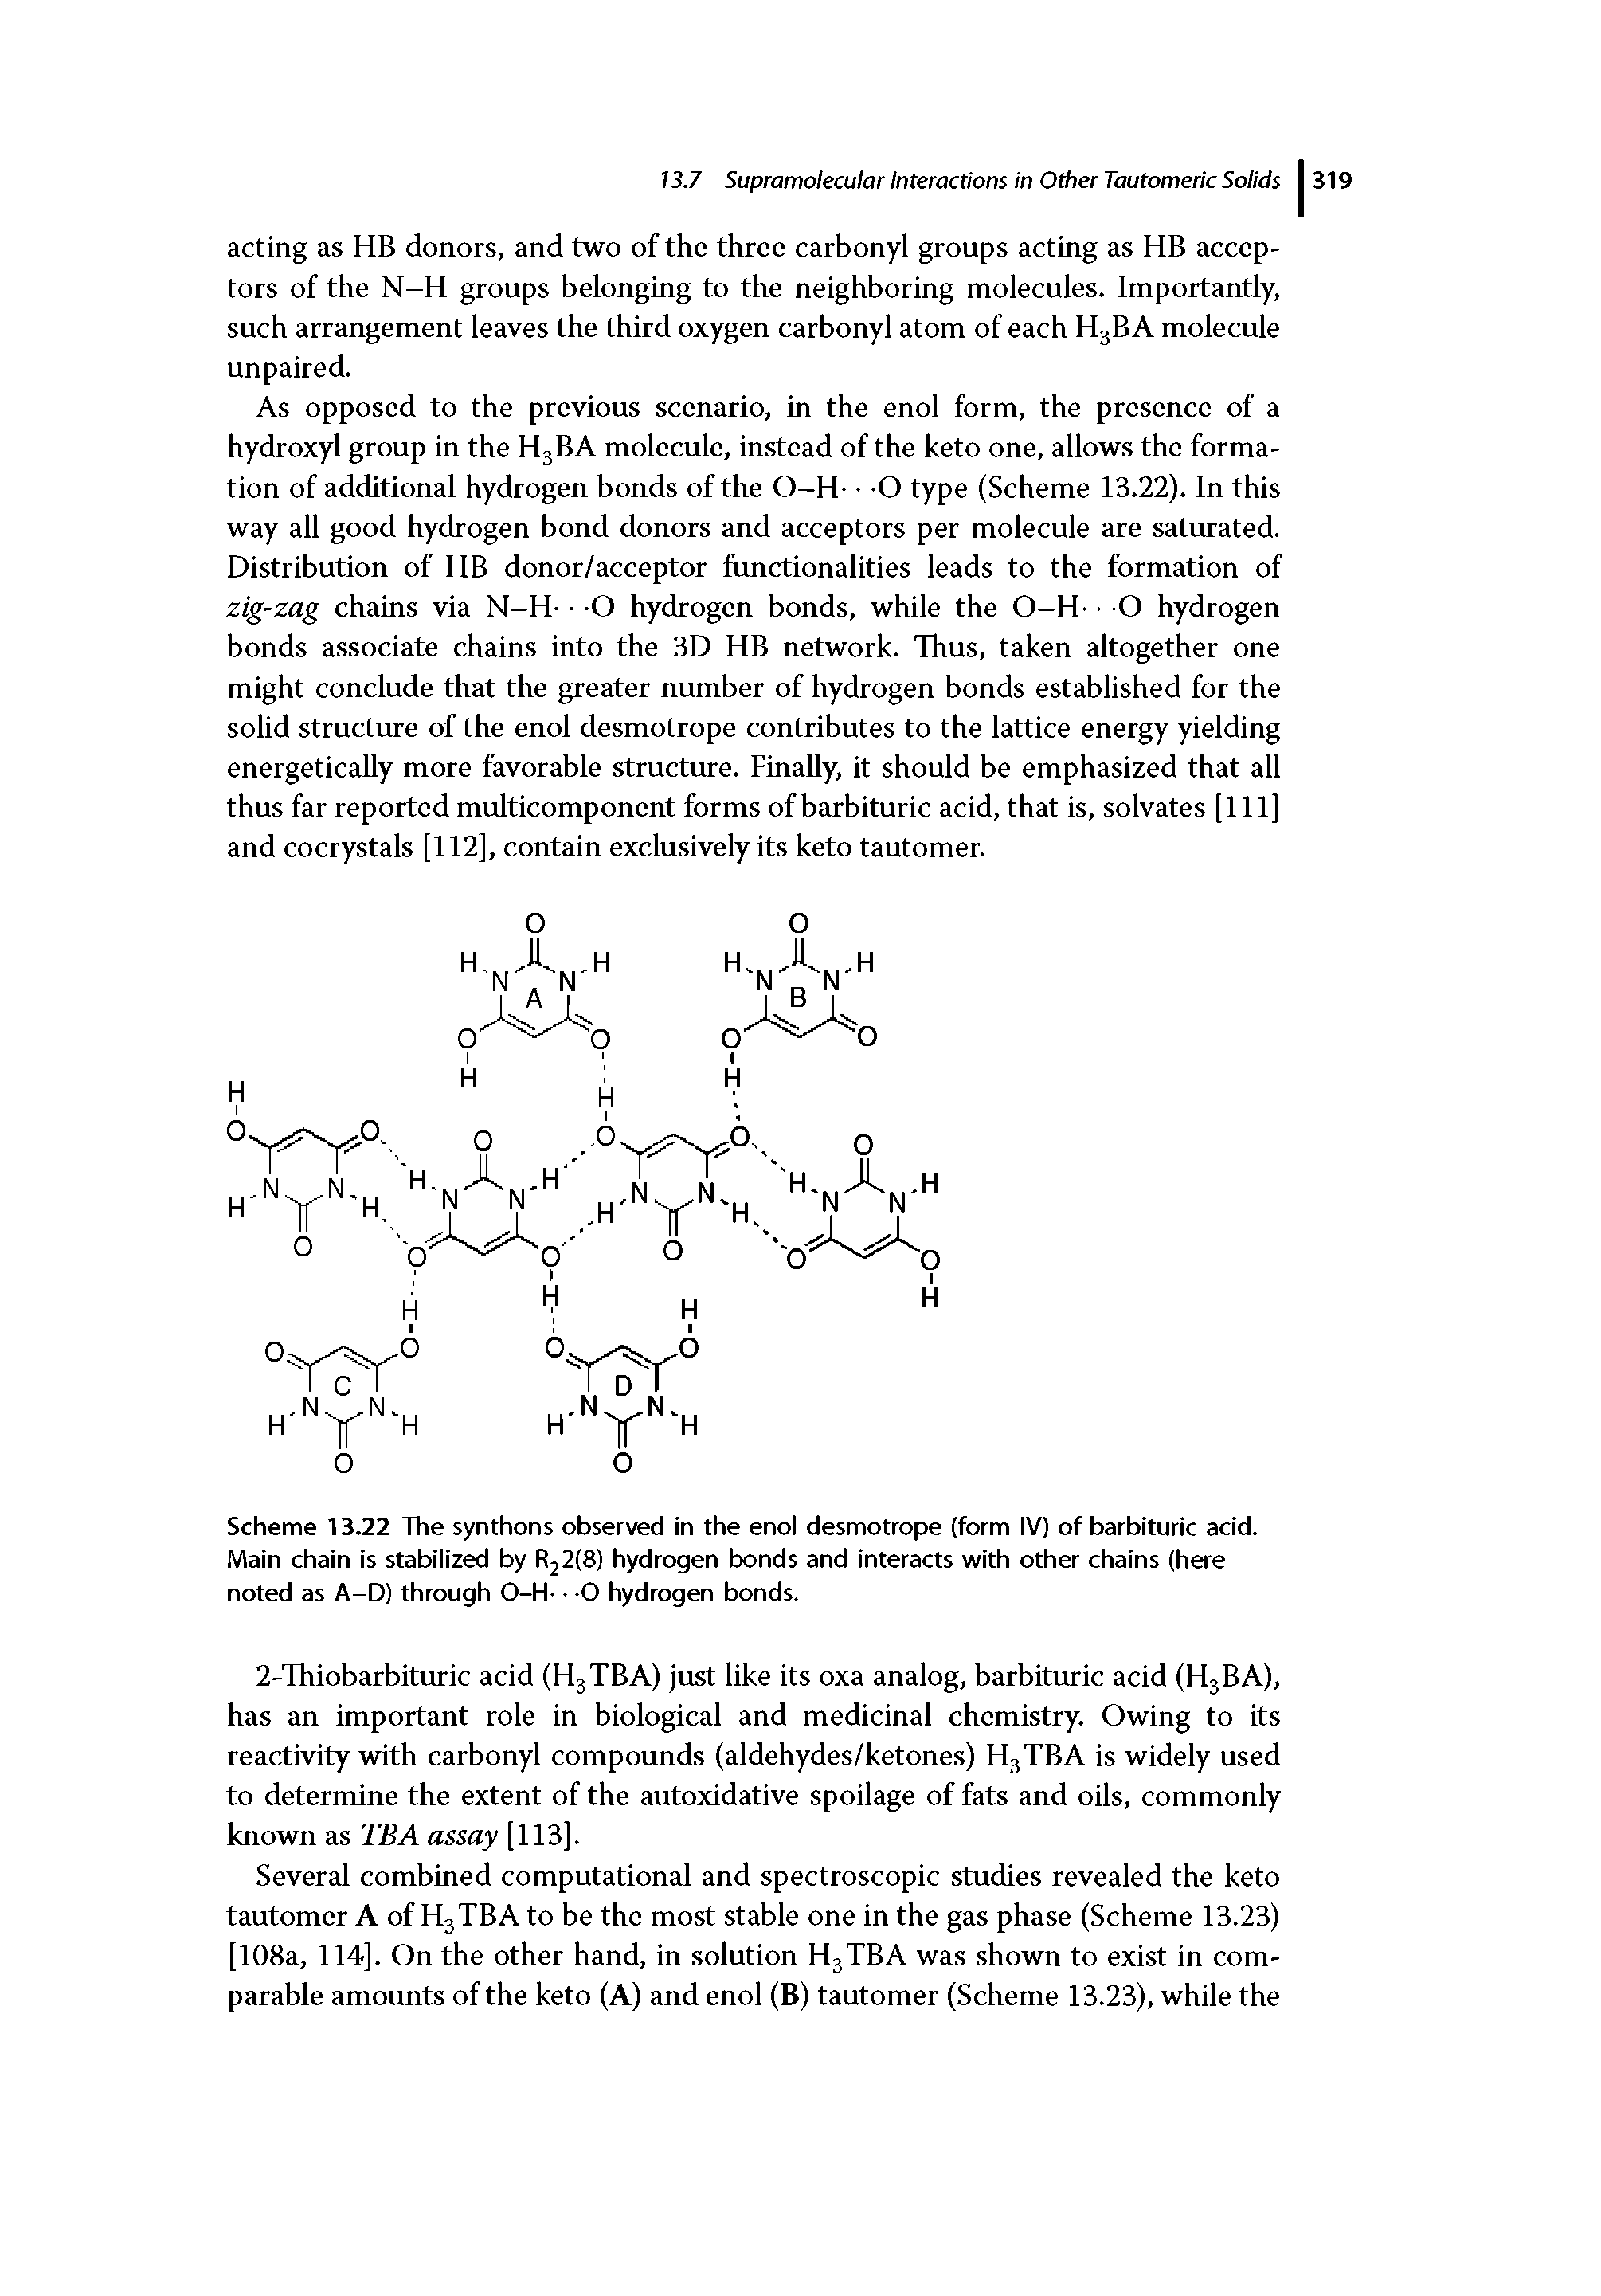 Scheme 13.22 The synthons observed in the enol desmotrope (form IV) of barbituric acid. Main chain is stabilized by R22(8) hydrogen bonds and interacts with other chains (here noted as A-D) through O-H- 0 hydrogen bonds.